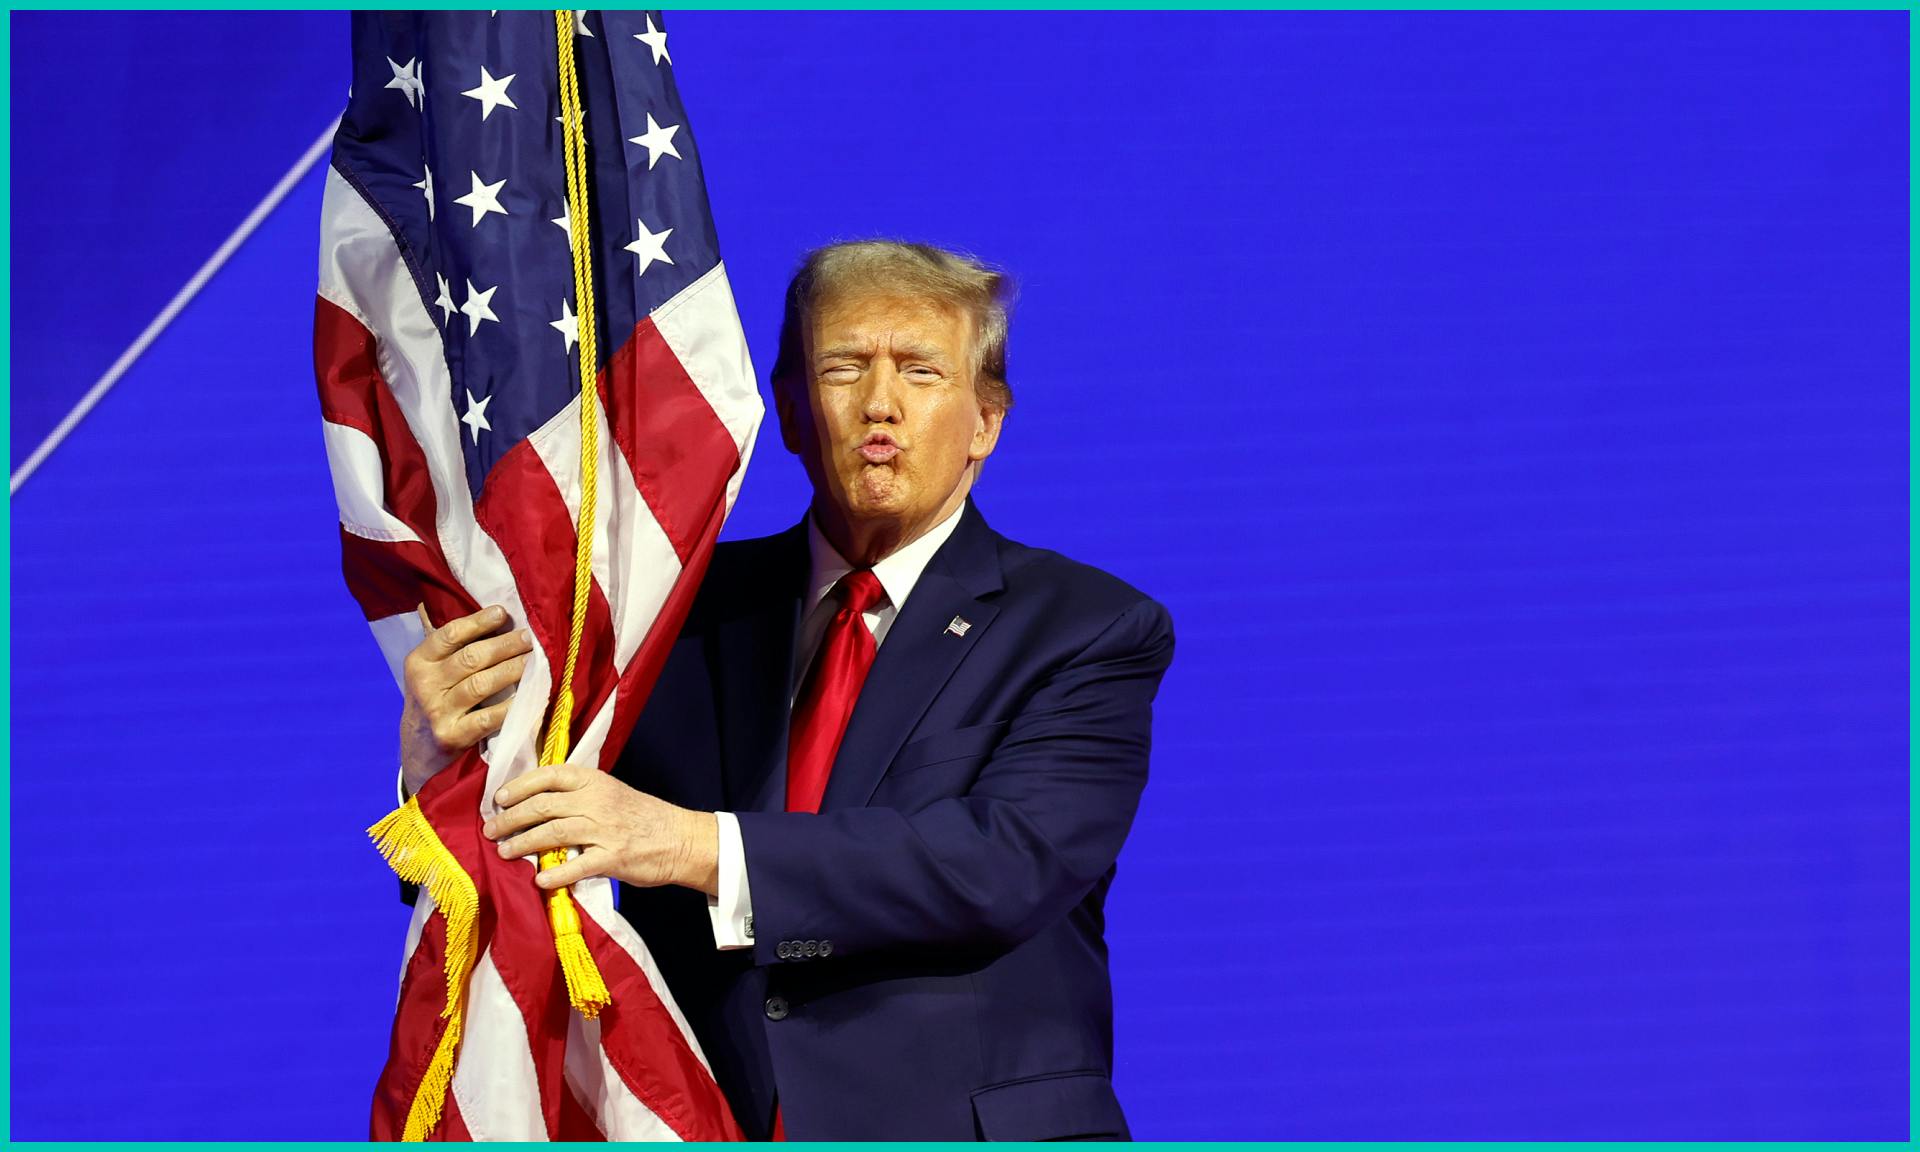 Republican presidential candidate and former U.S. President Donald Trump hugs an American flag as he arrives at the Conservative Political Action Conference 